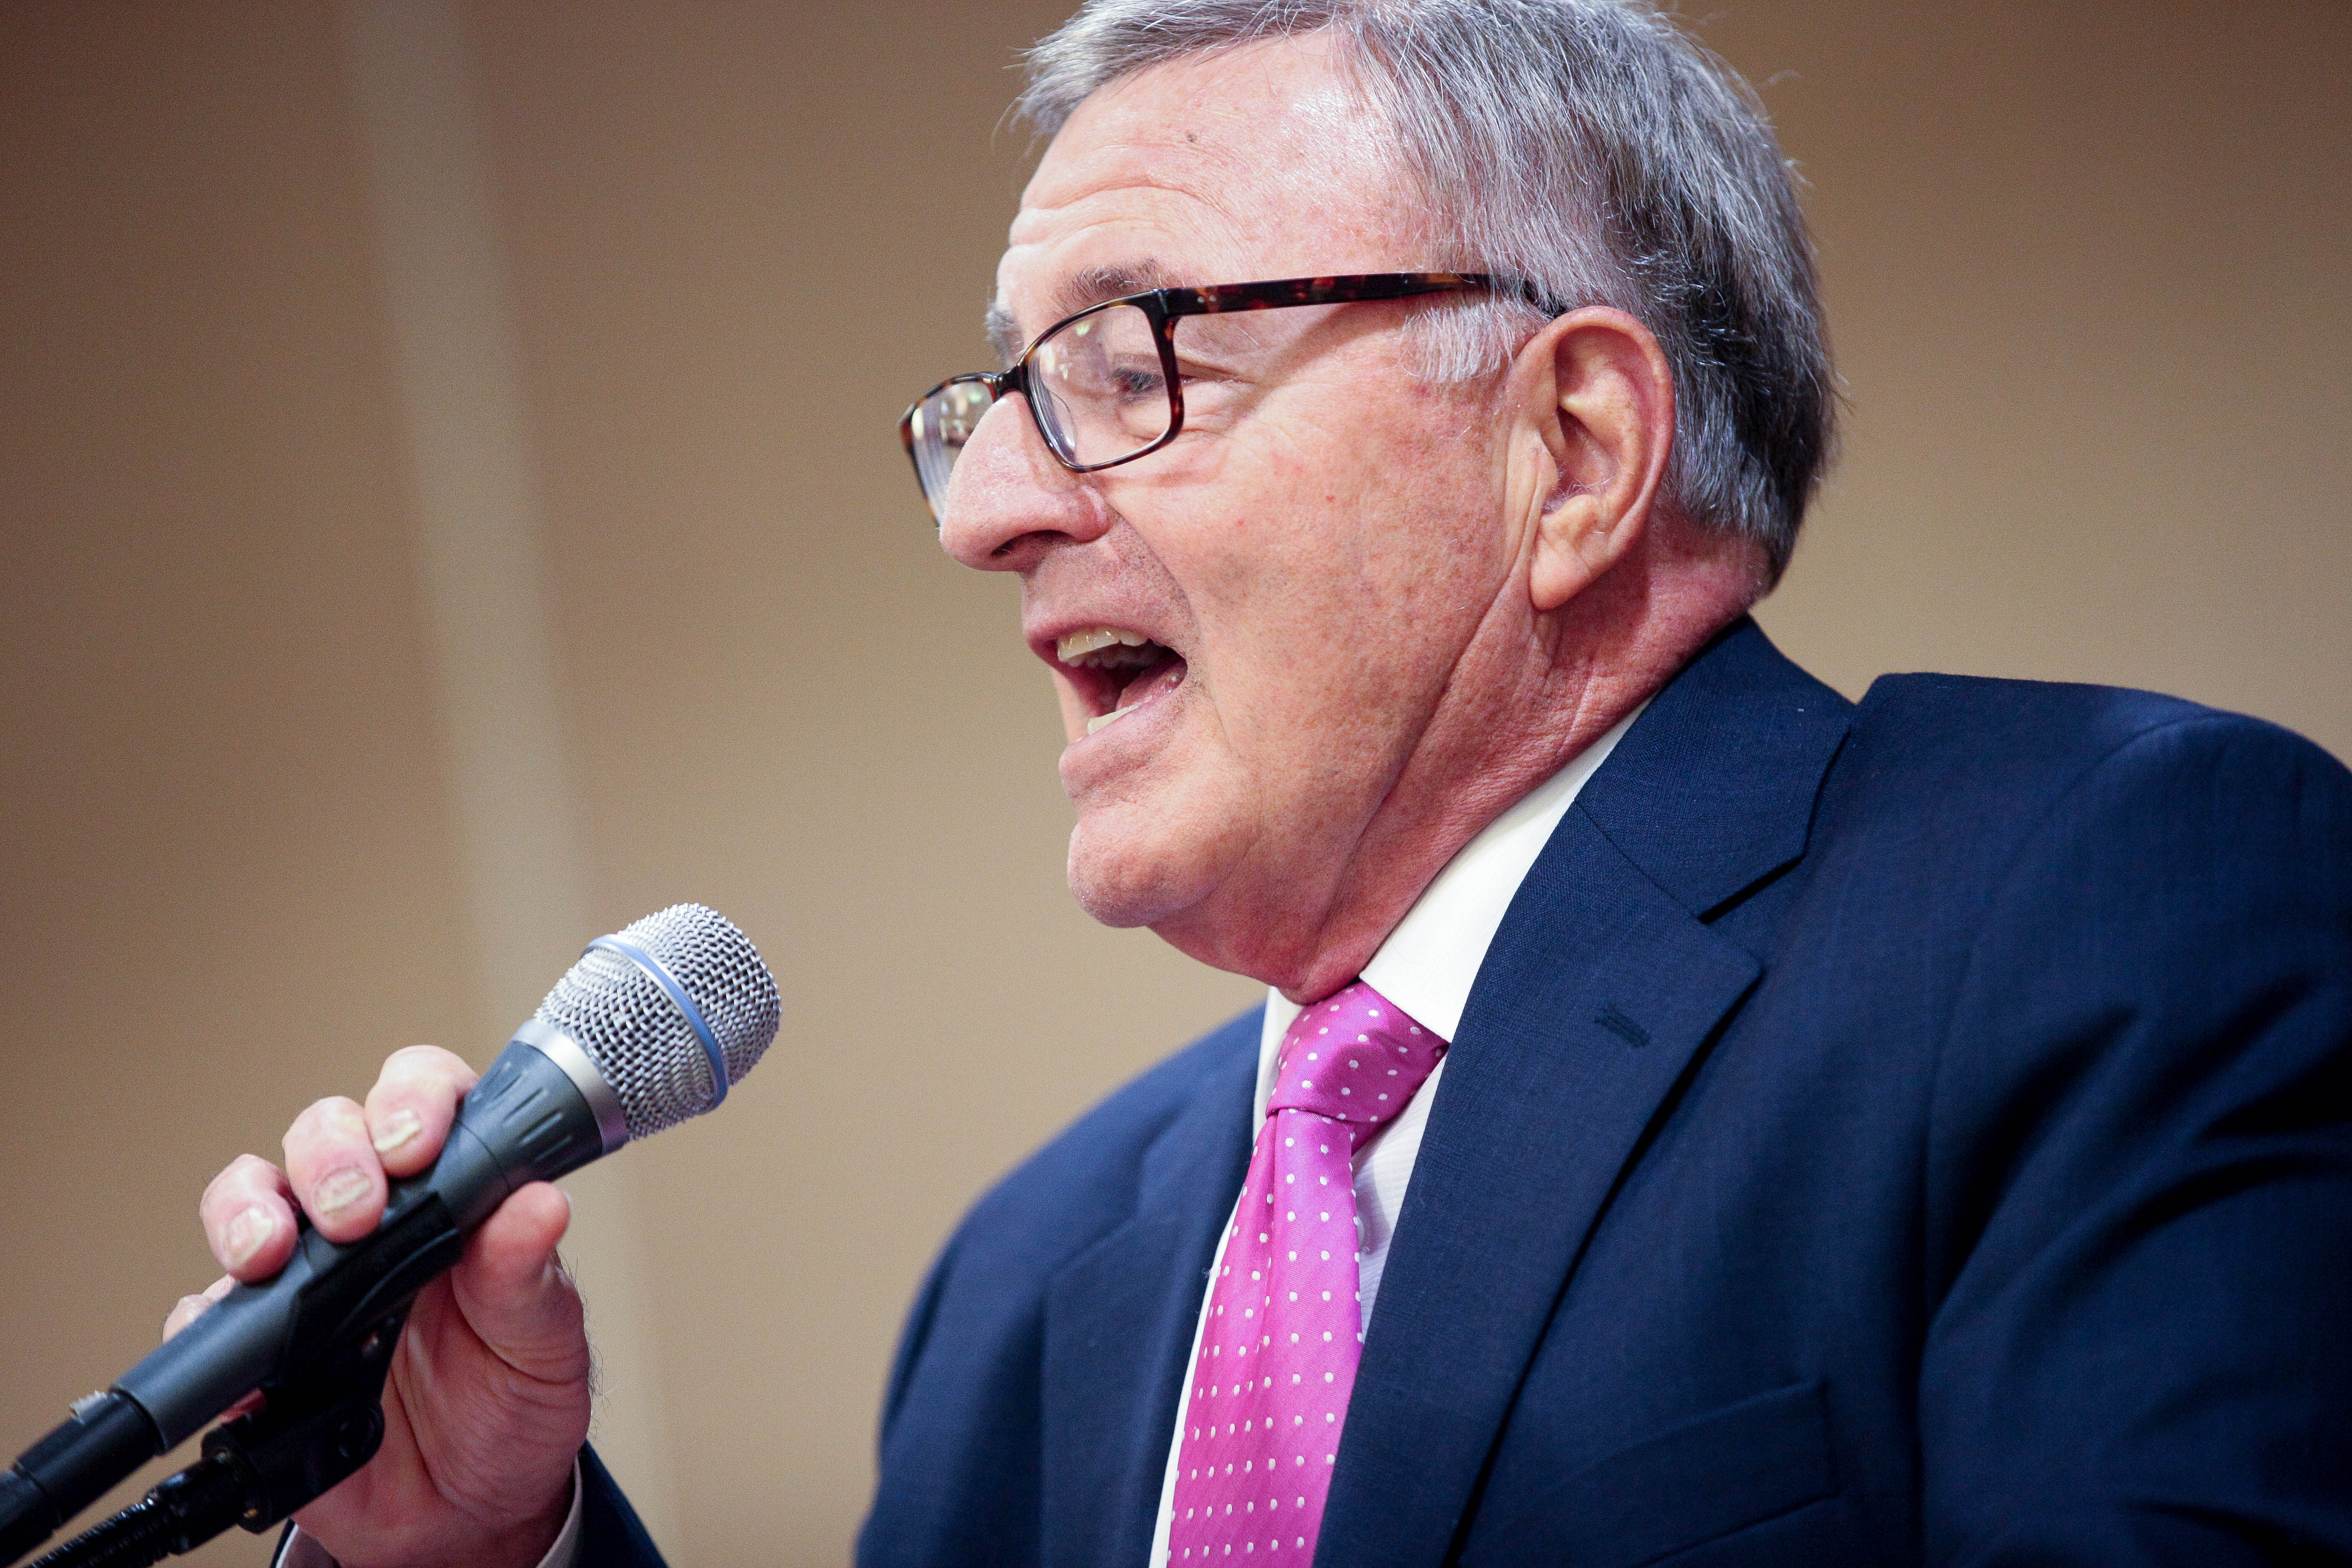 A close-up shot of Sen. John DeFrancisco as he speaks into a microphone.